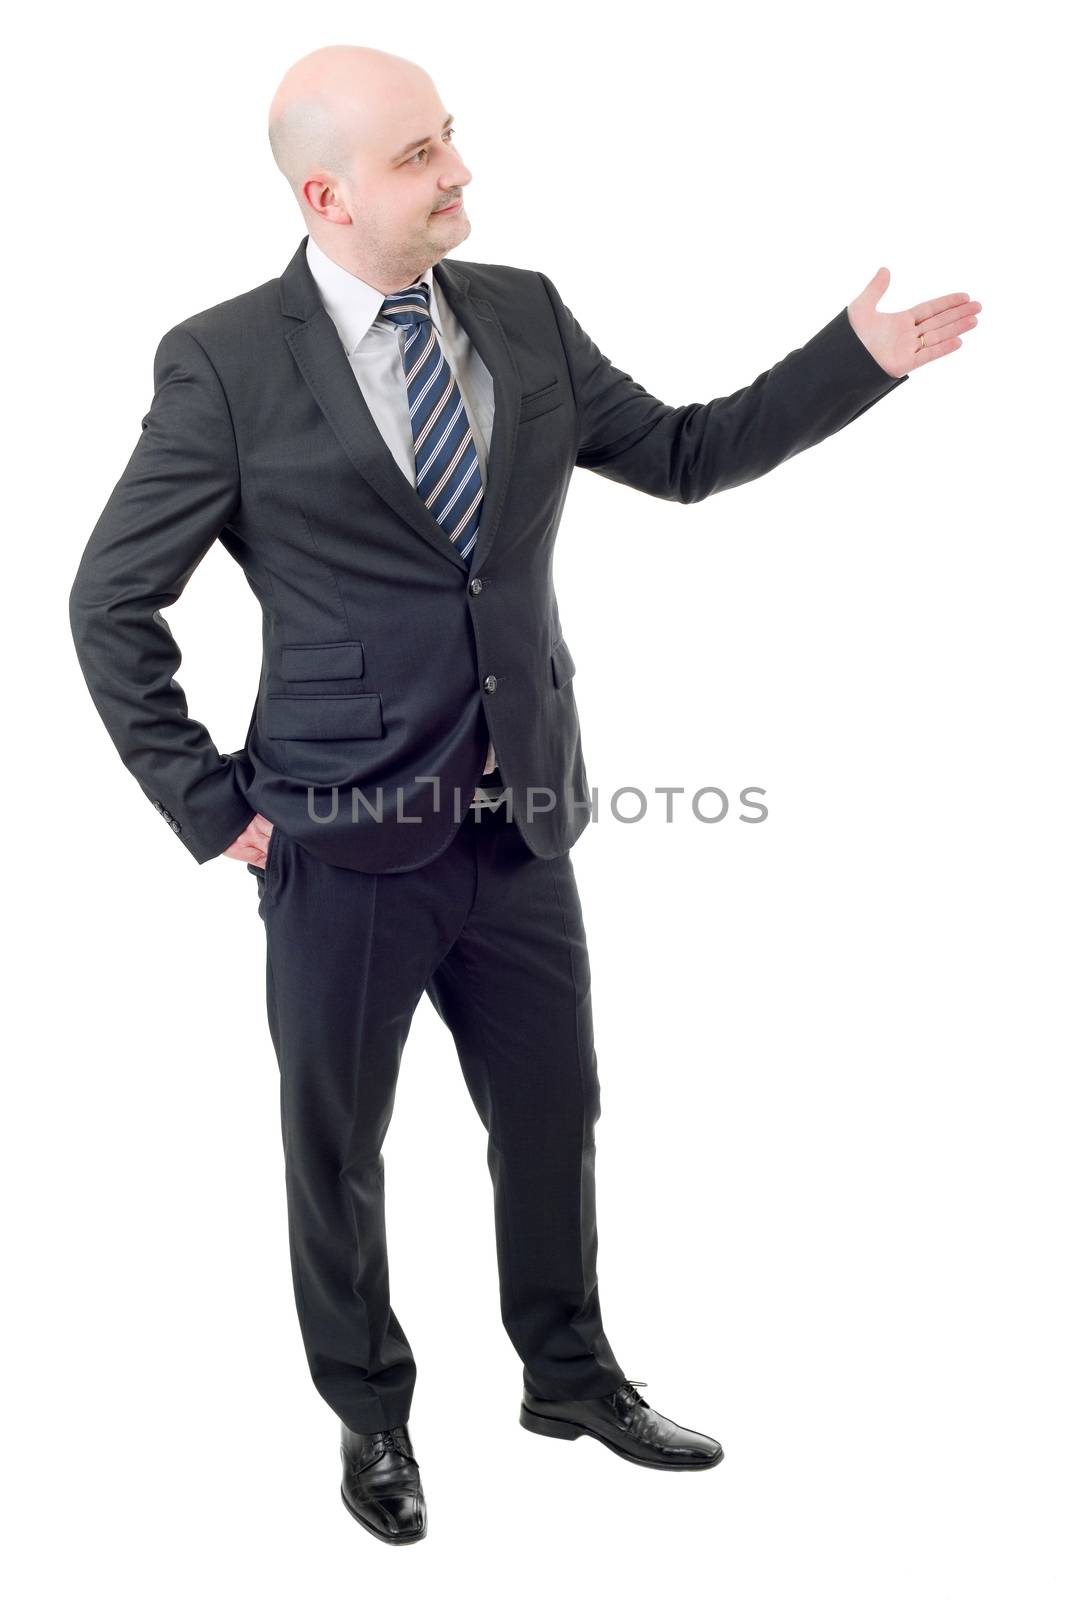 Handsome businessman with arm out in a welcoming gesture, isolated on white